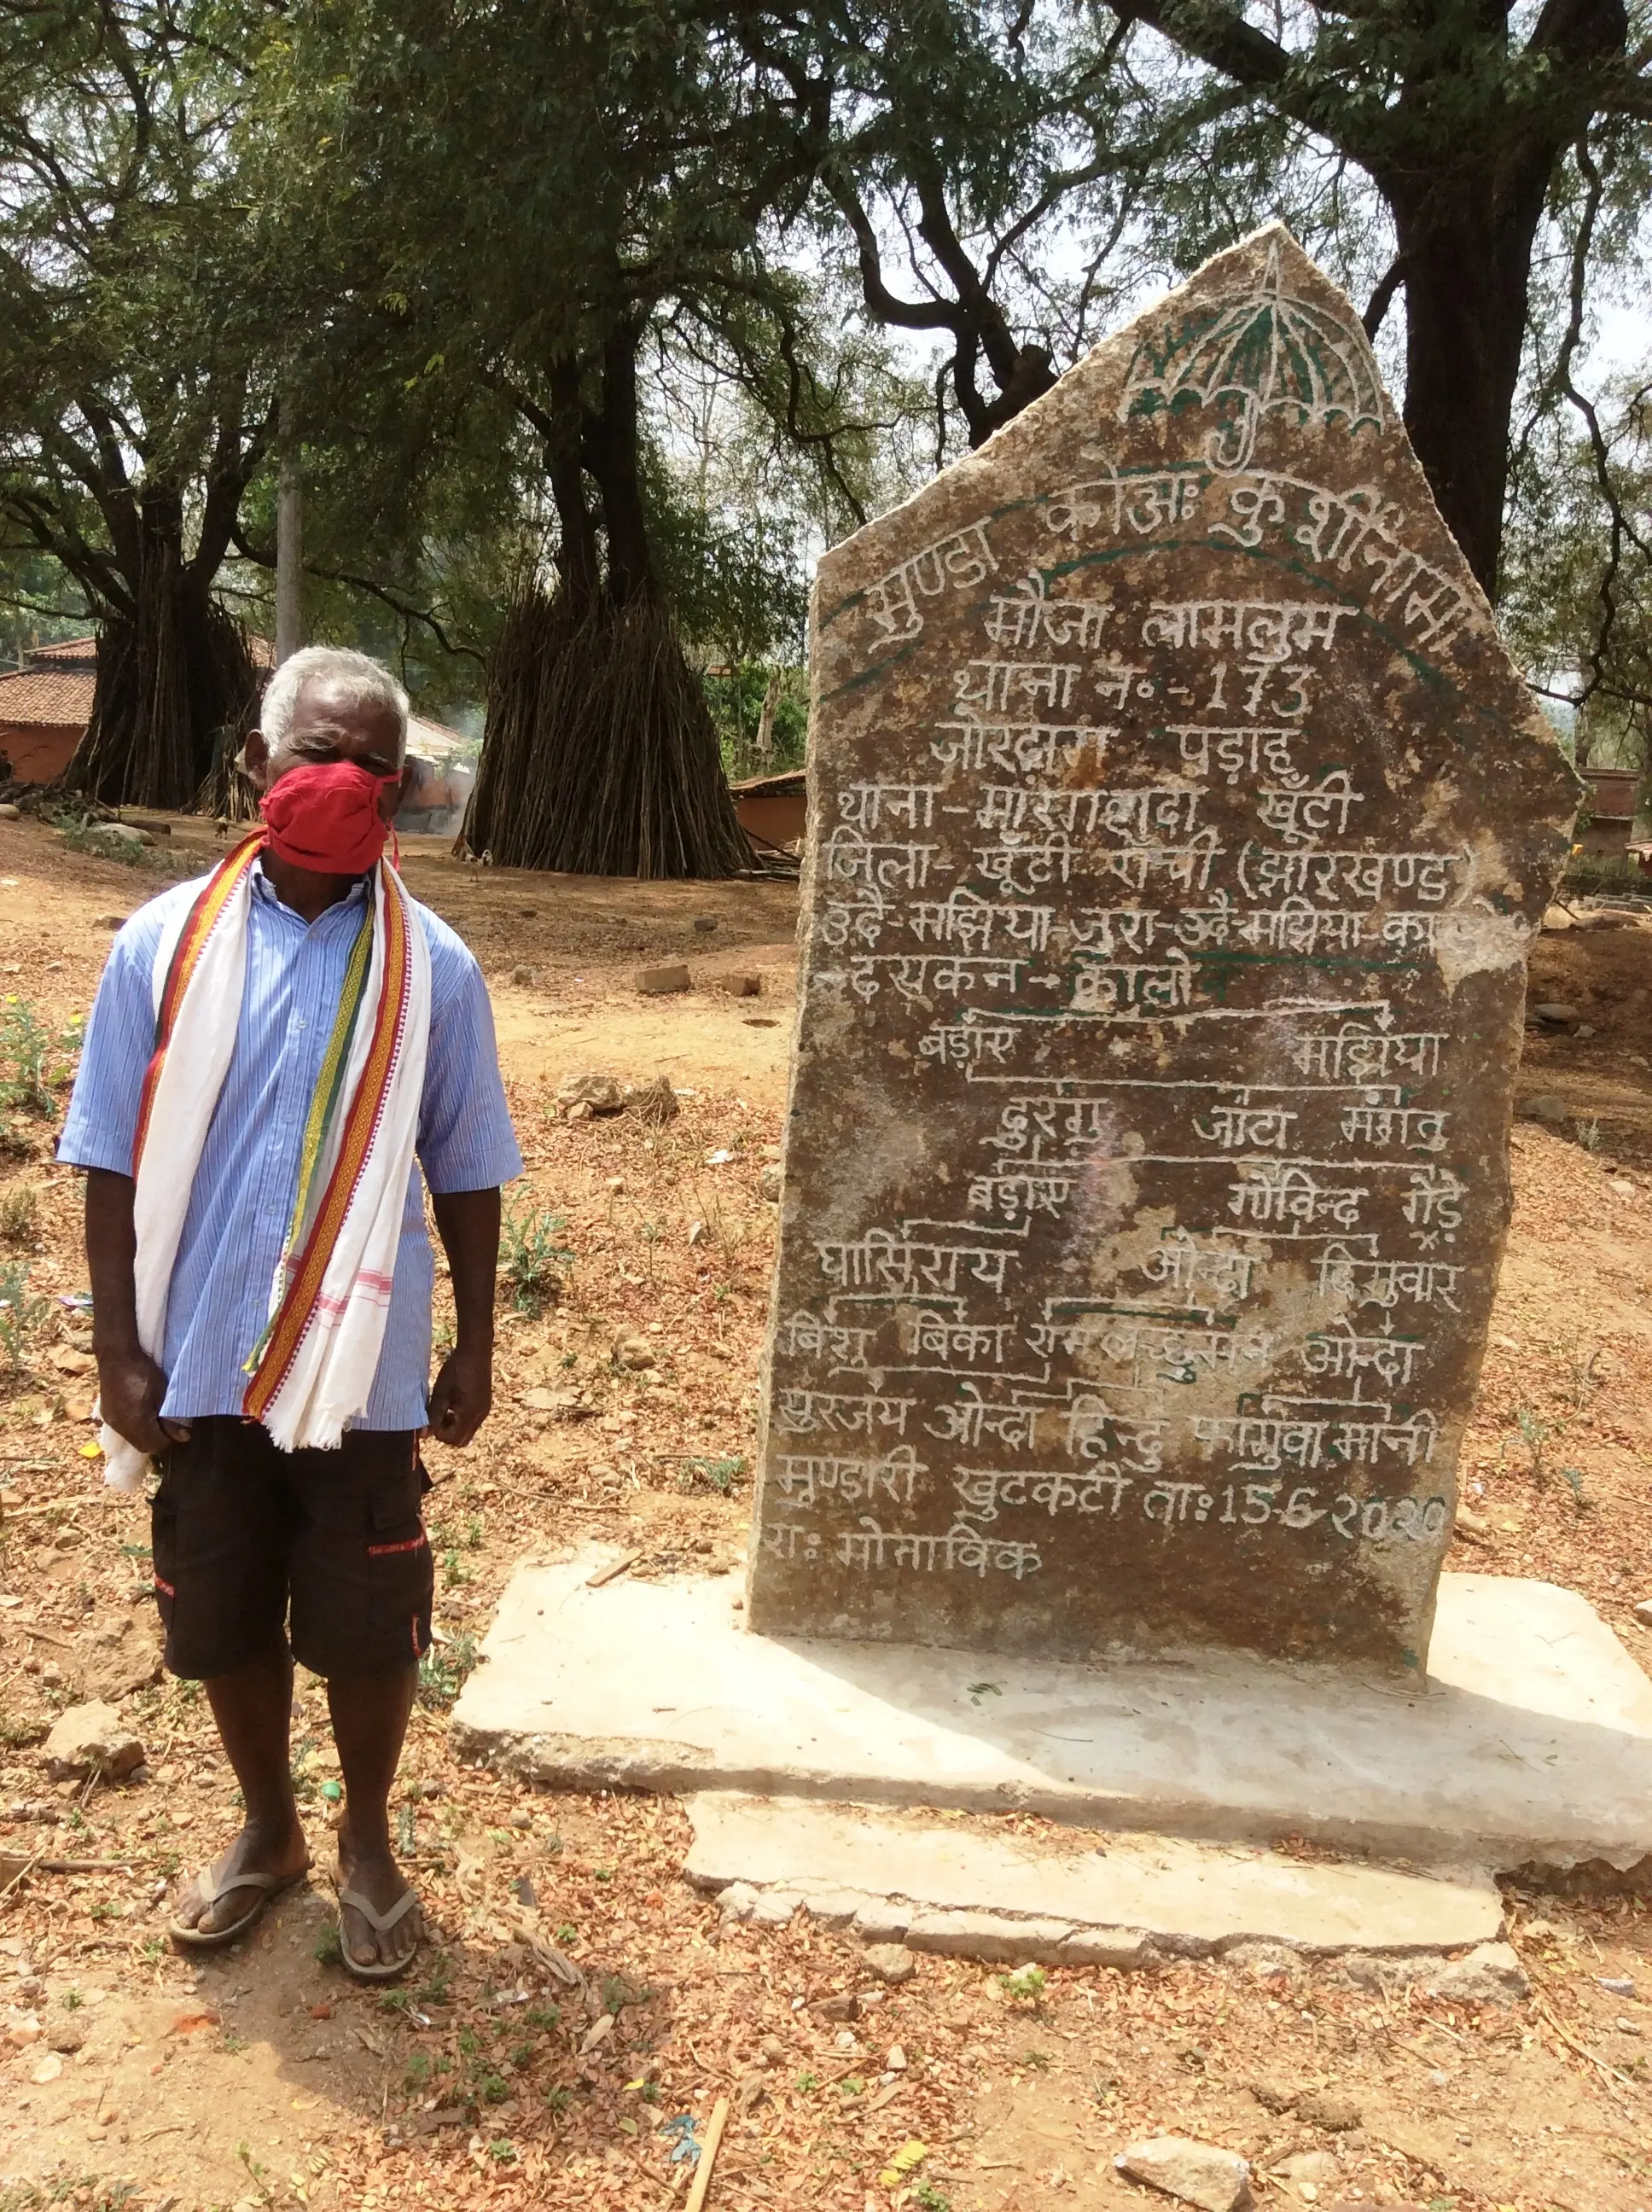 Man stands in front of erected stone slab